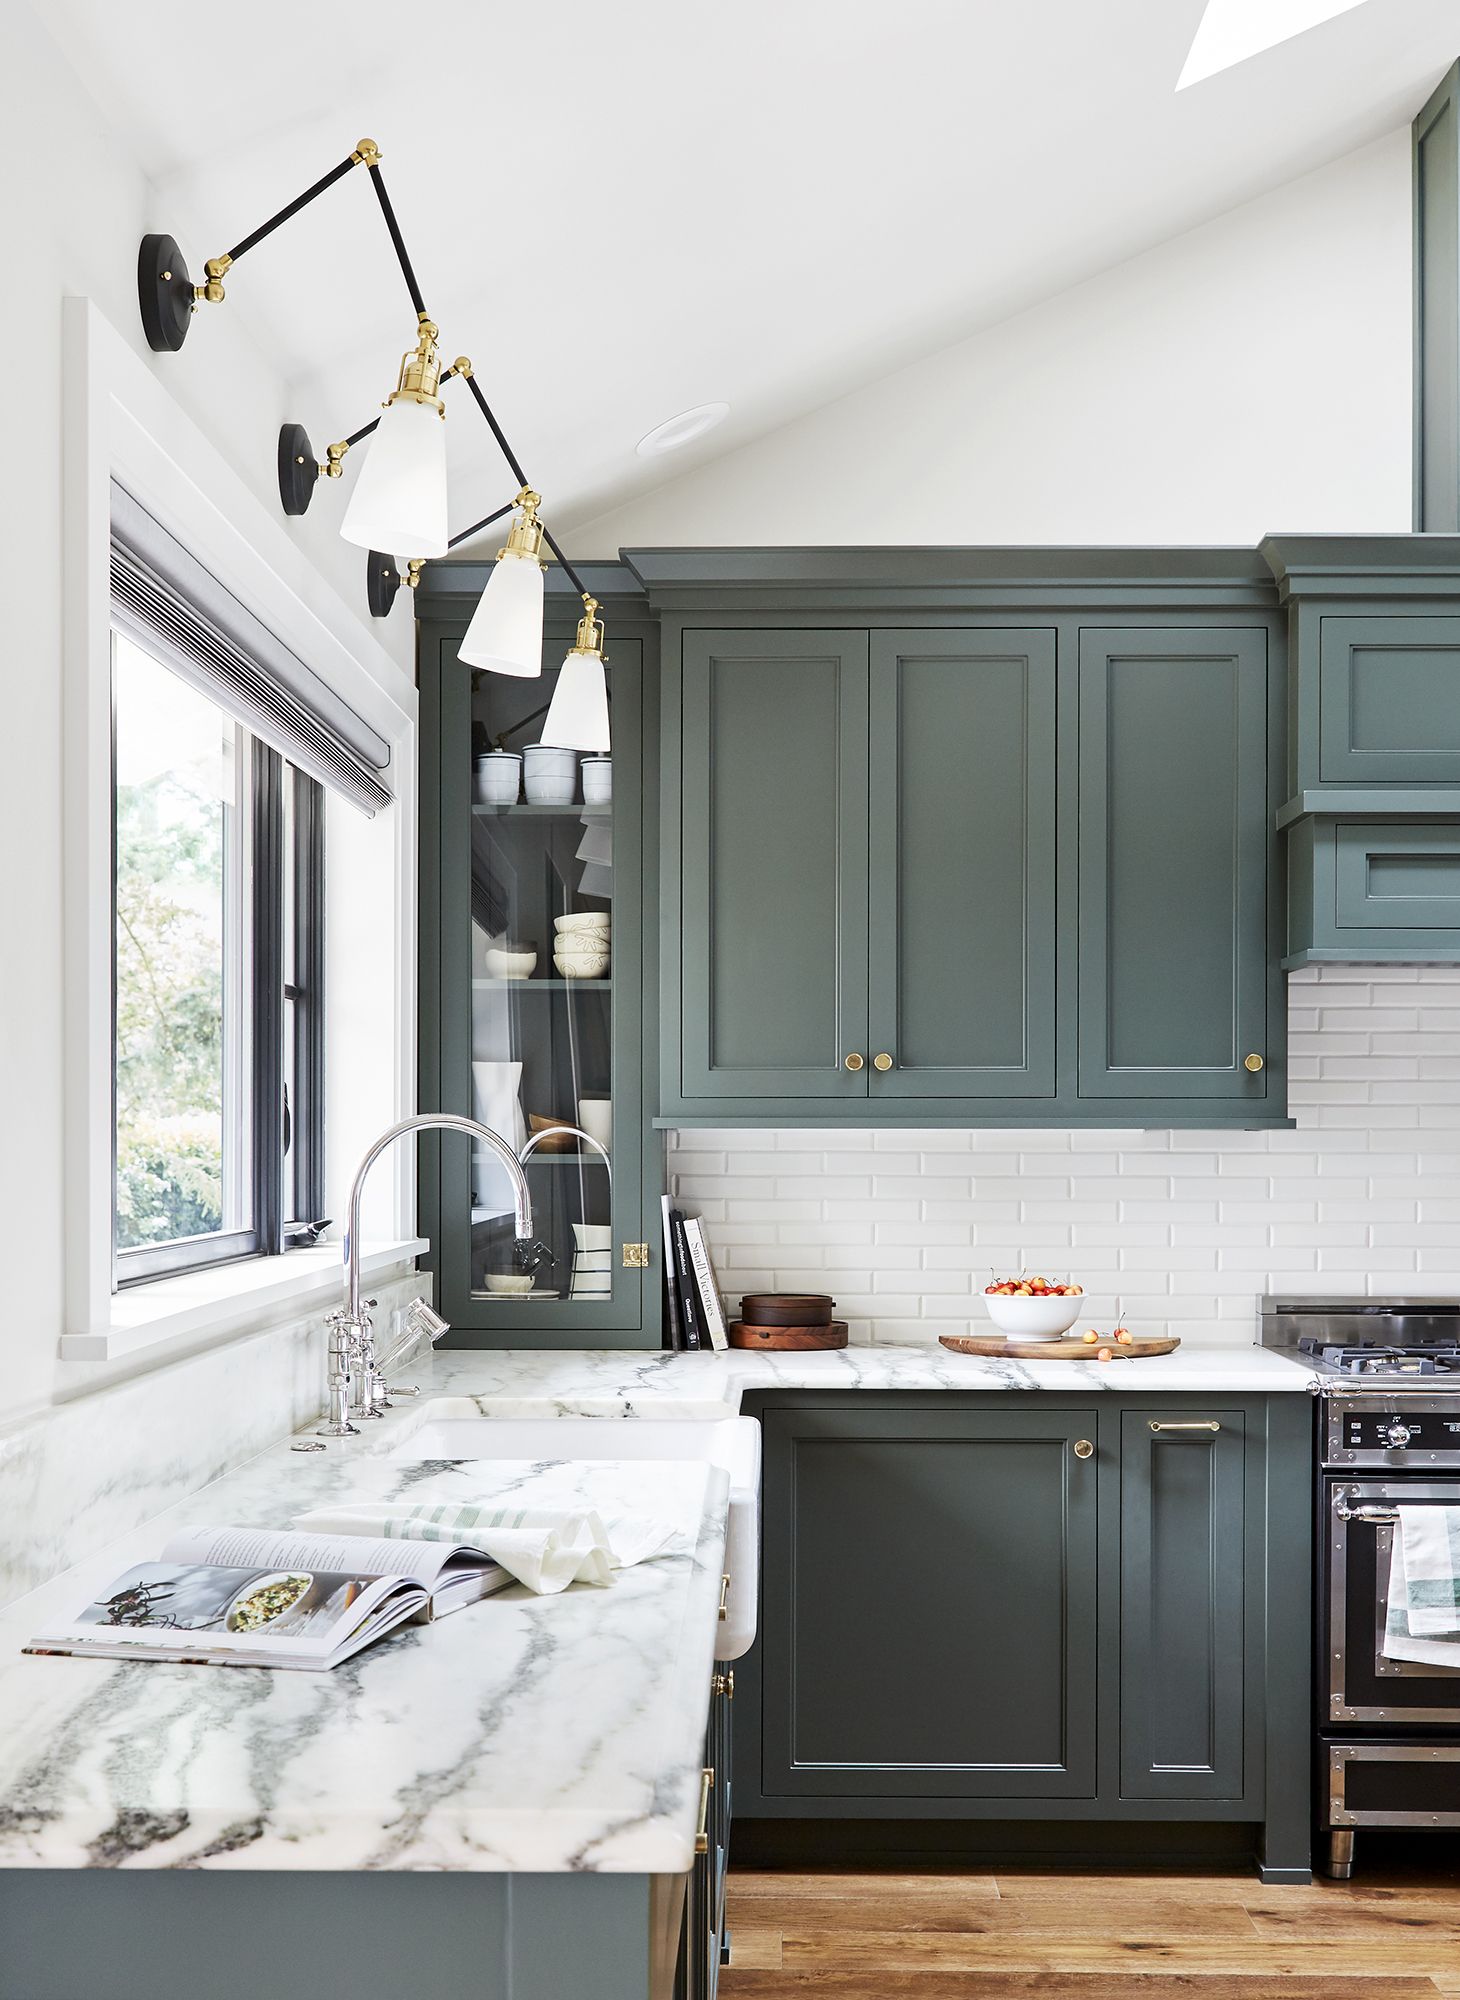 How To Paint Your Kitchen Cabinets, Can You Paint Kitchen Cabinets If They Are Not Real Wood